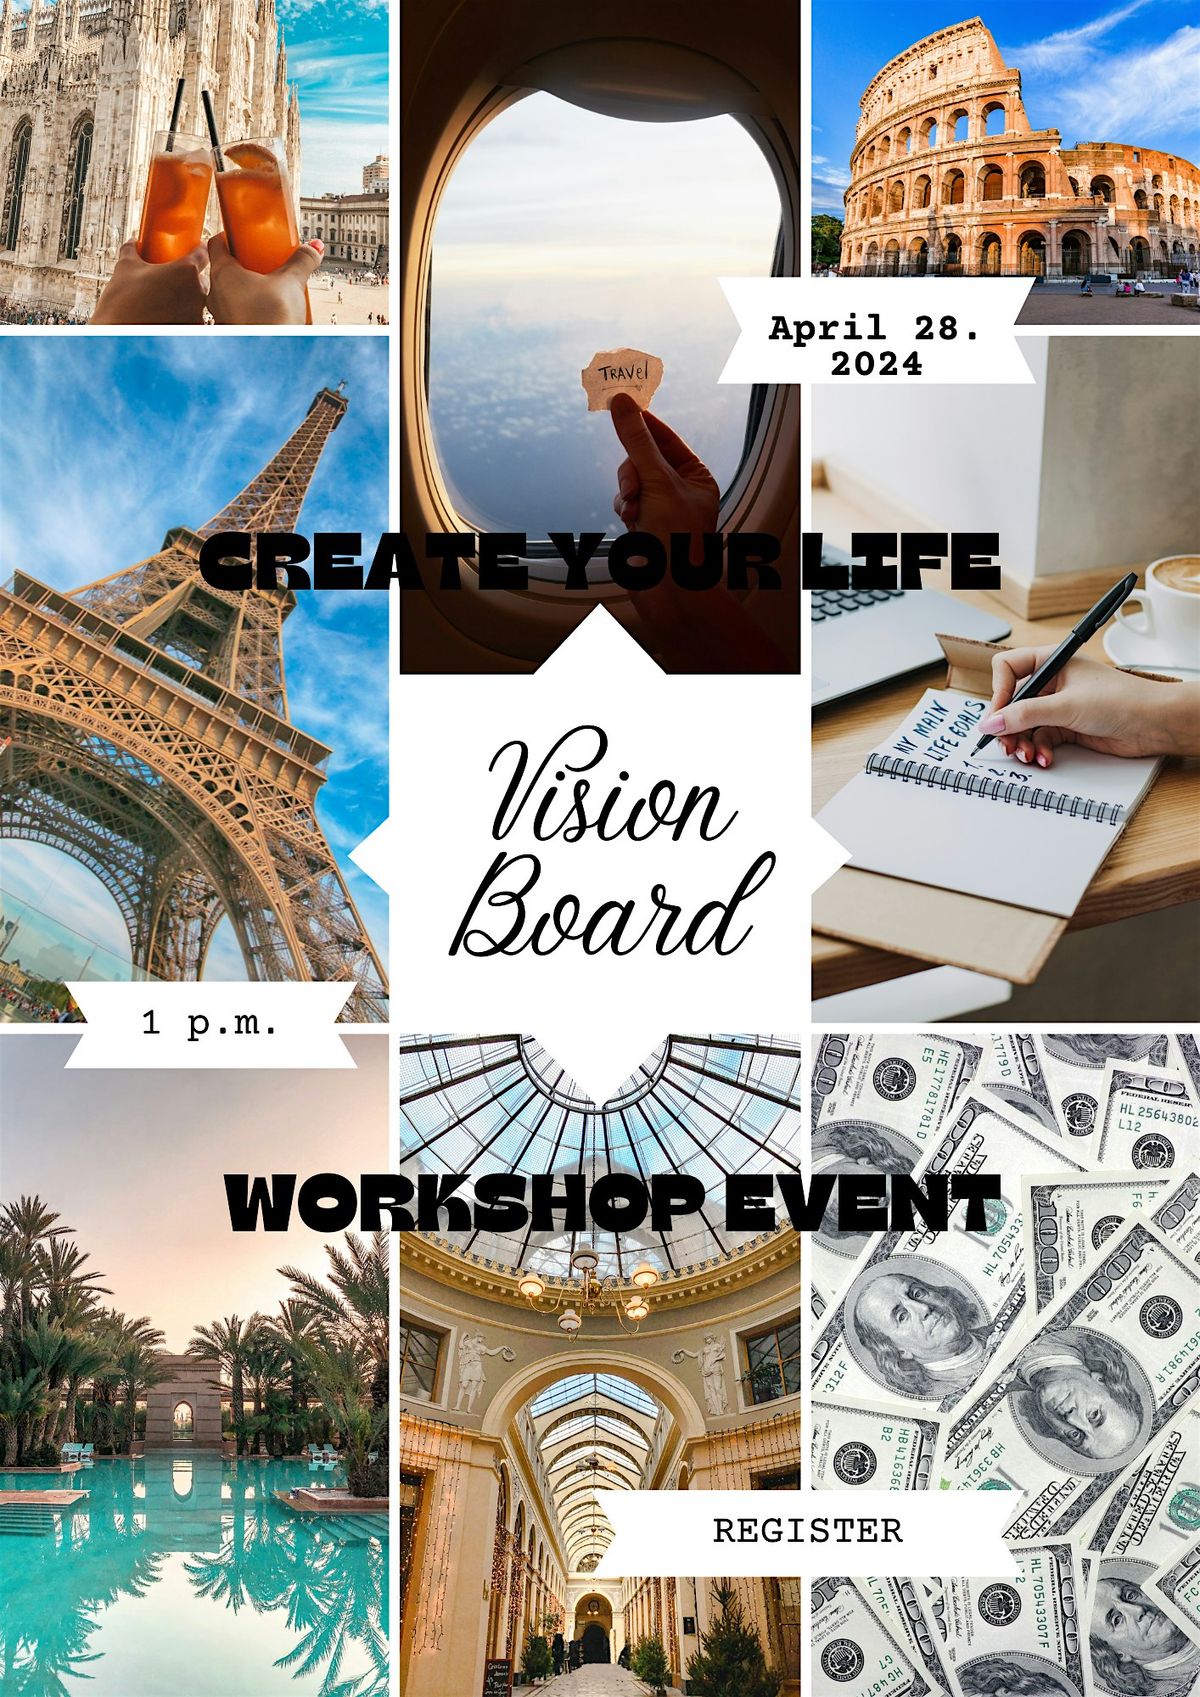 CREATE YOUR LIFE VISION-BOARD WORKSHOP EVENT